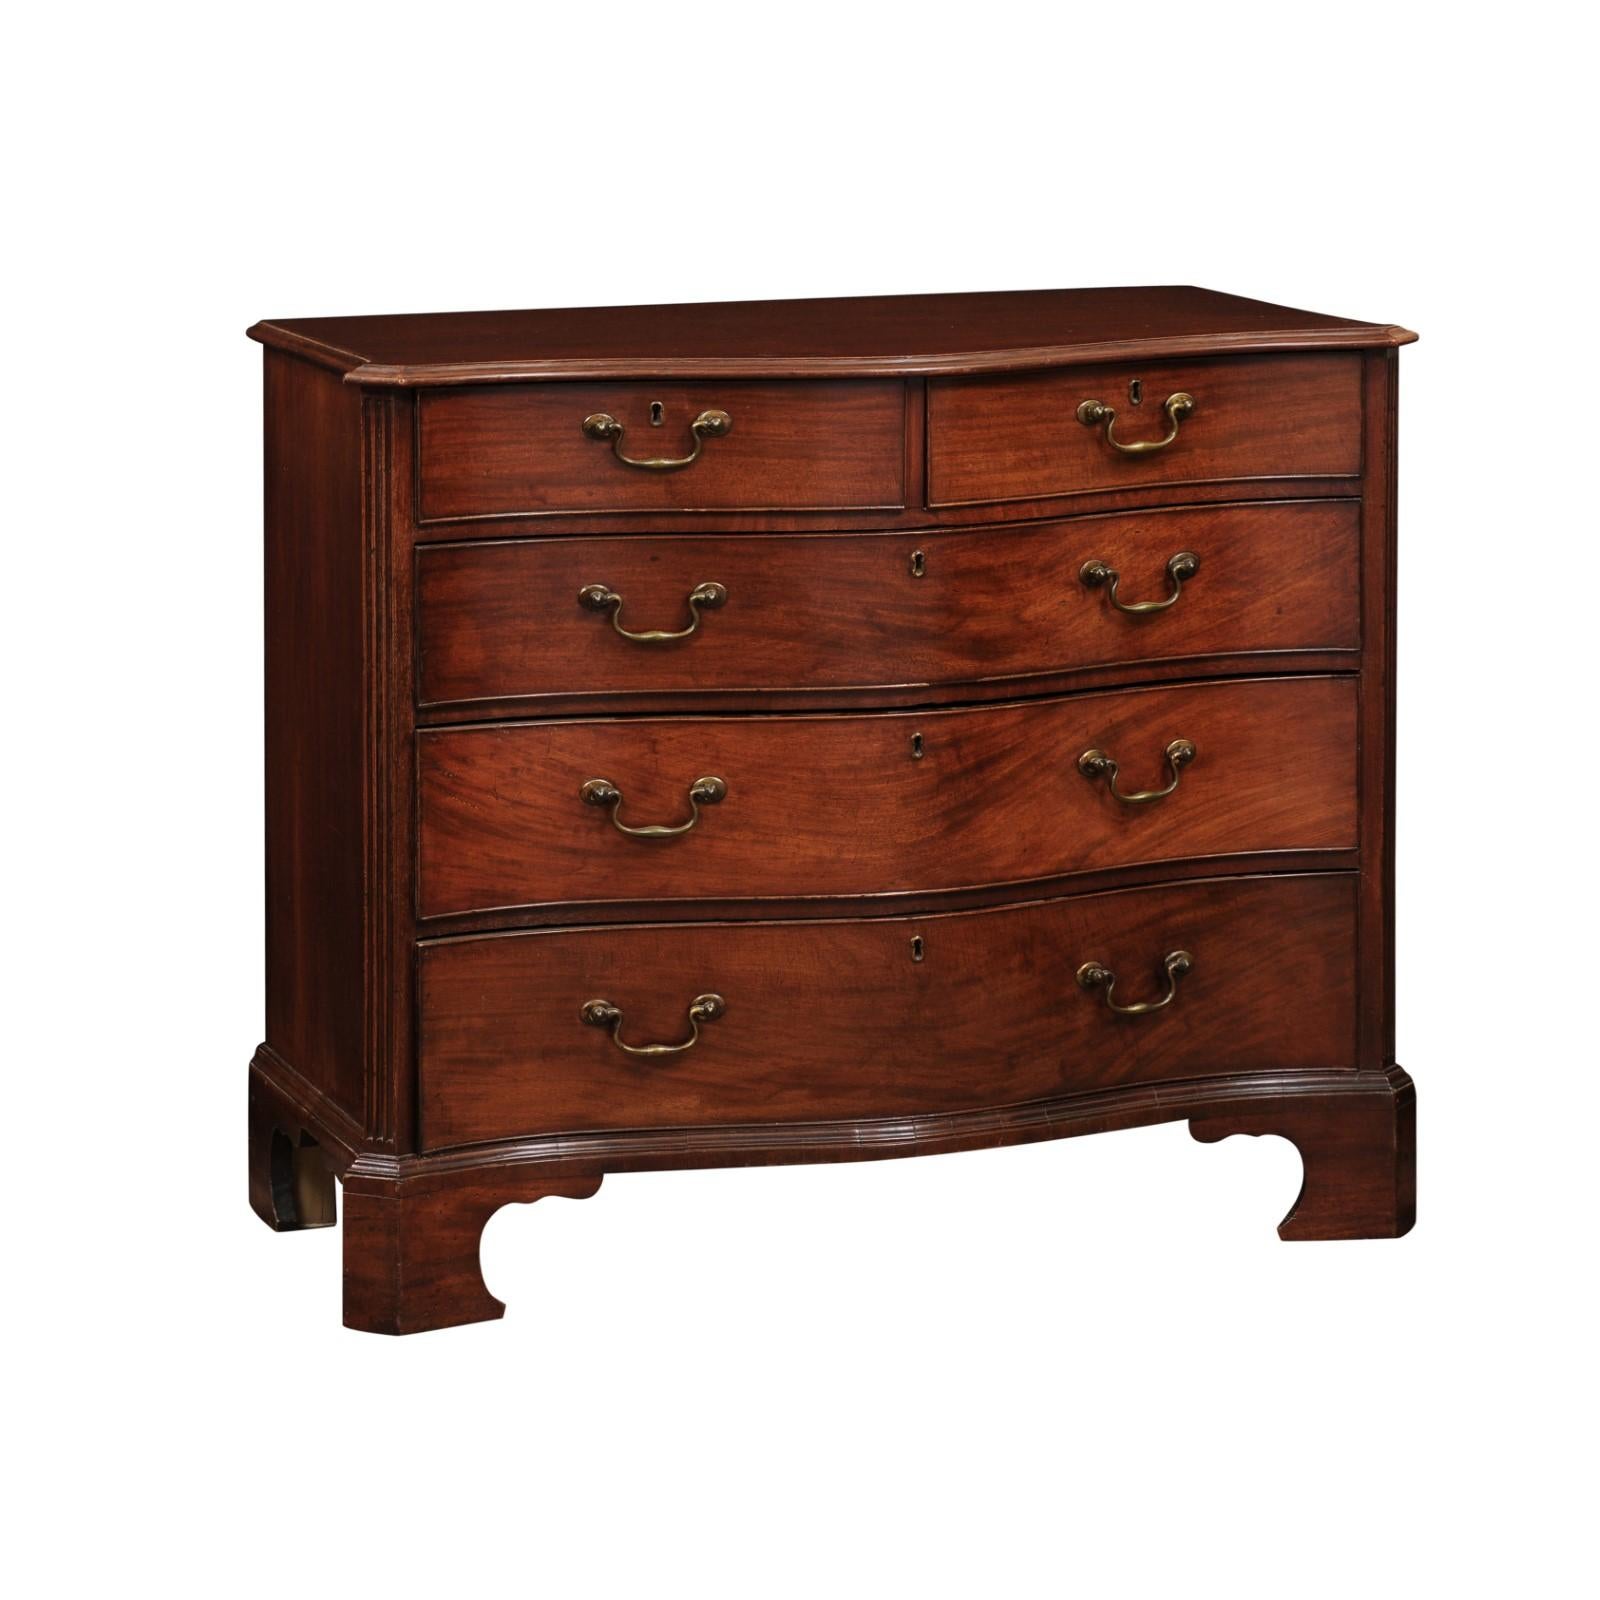 Late 18th Century English George III Mahogany Serpentine Chest with 5 Drawers, Fluted Canted Sides & Bracket Feet